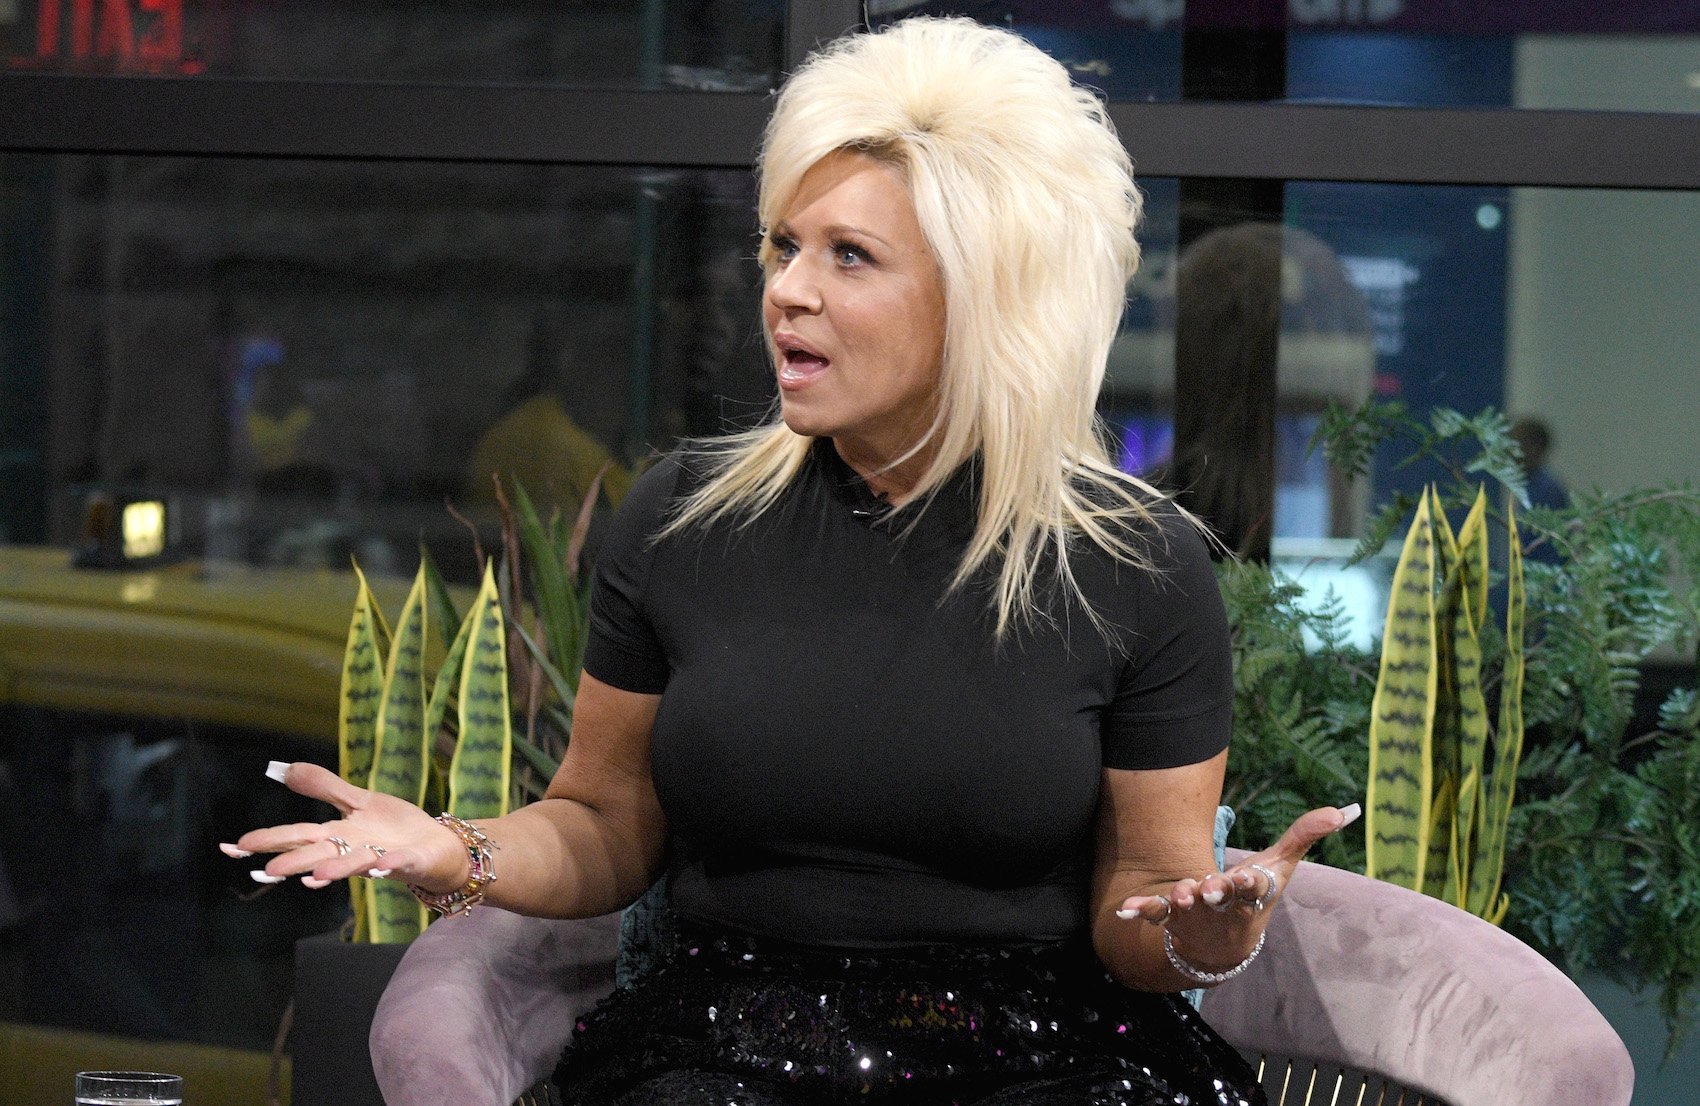 ‘Long Island Medium’: Theresa Caputo’s Daughter’s Wedding Day is Almost Here